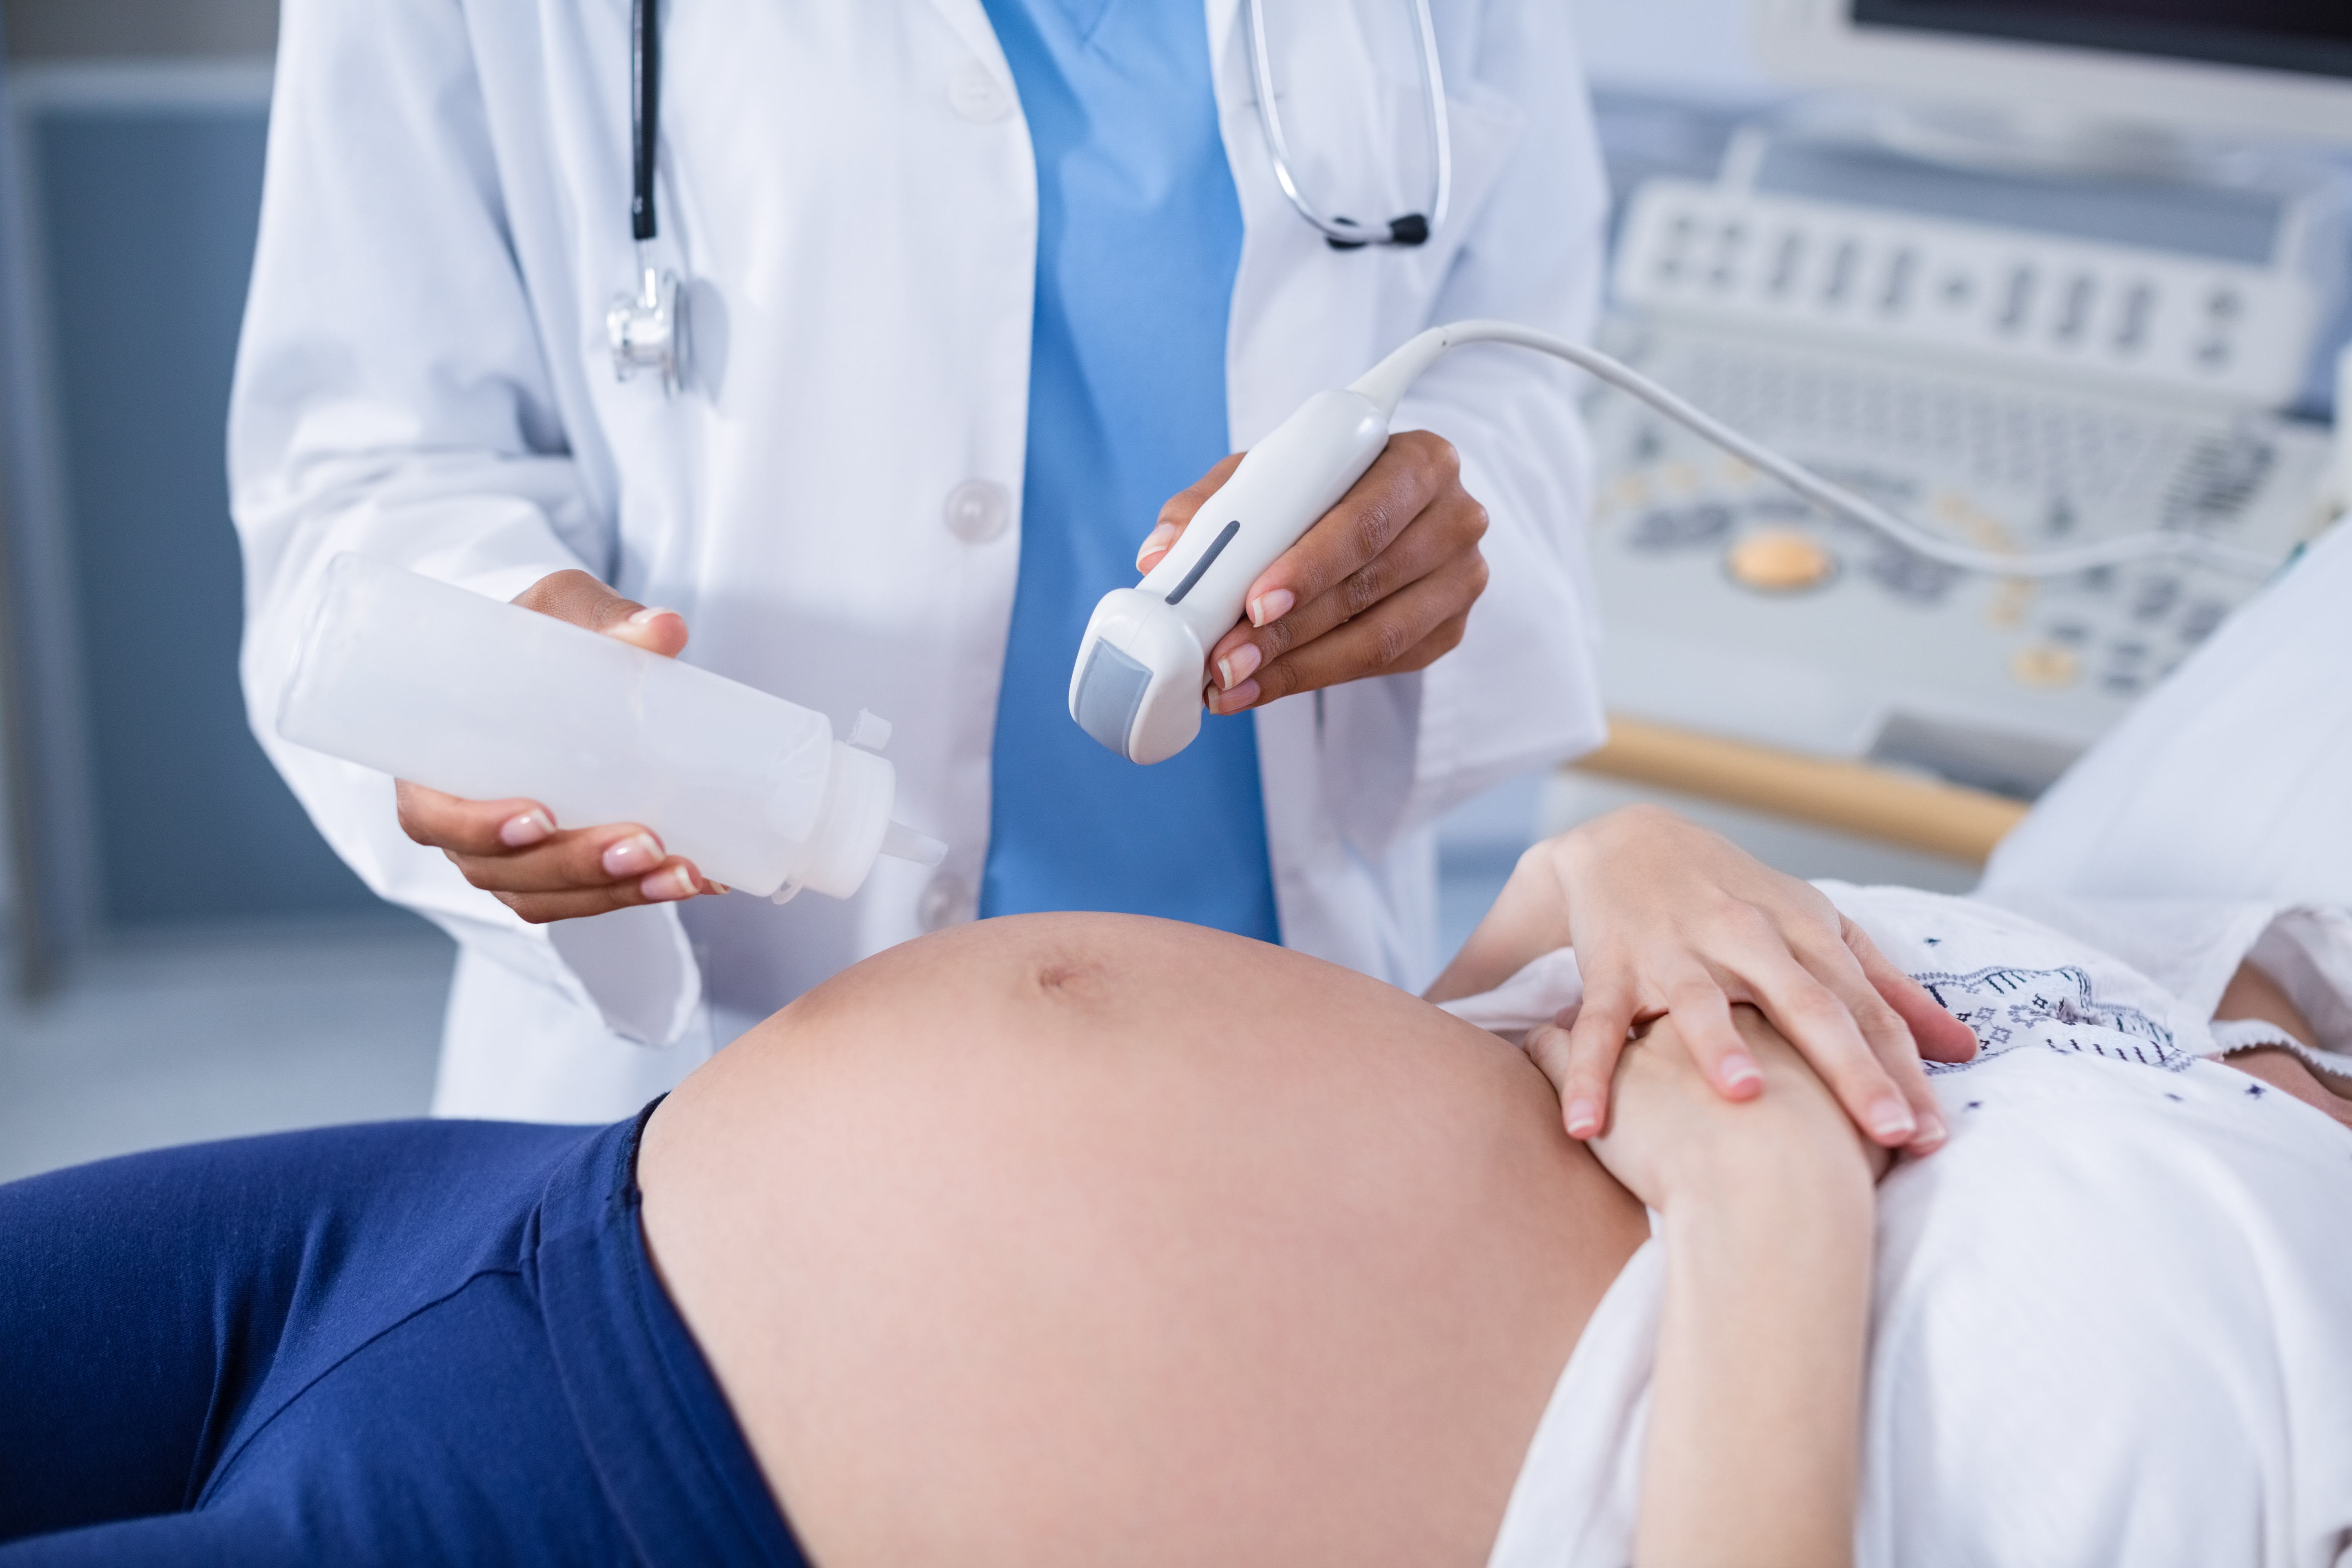 Pregnant woman receiving a ultrasound scan on the stomach in hospital